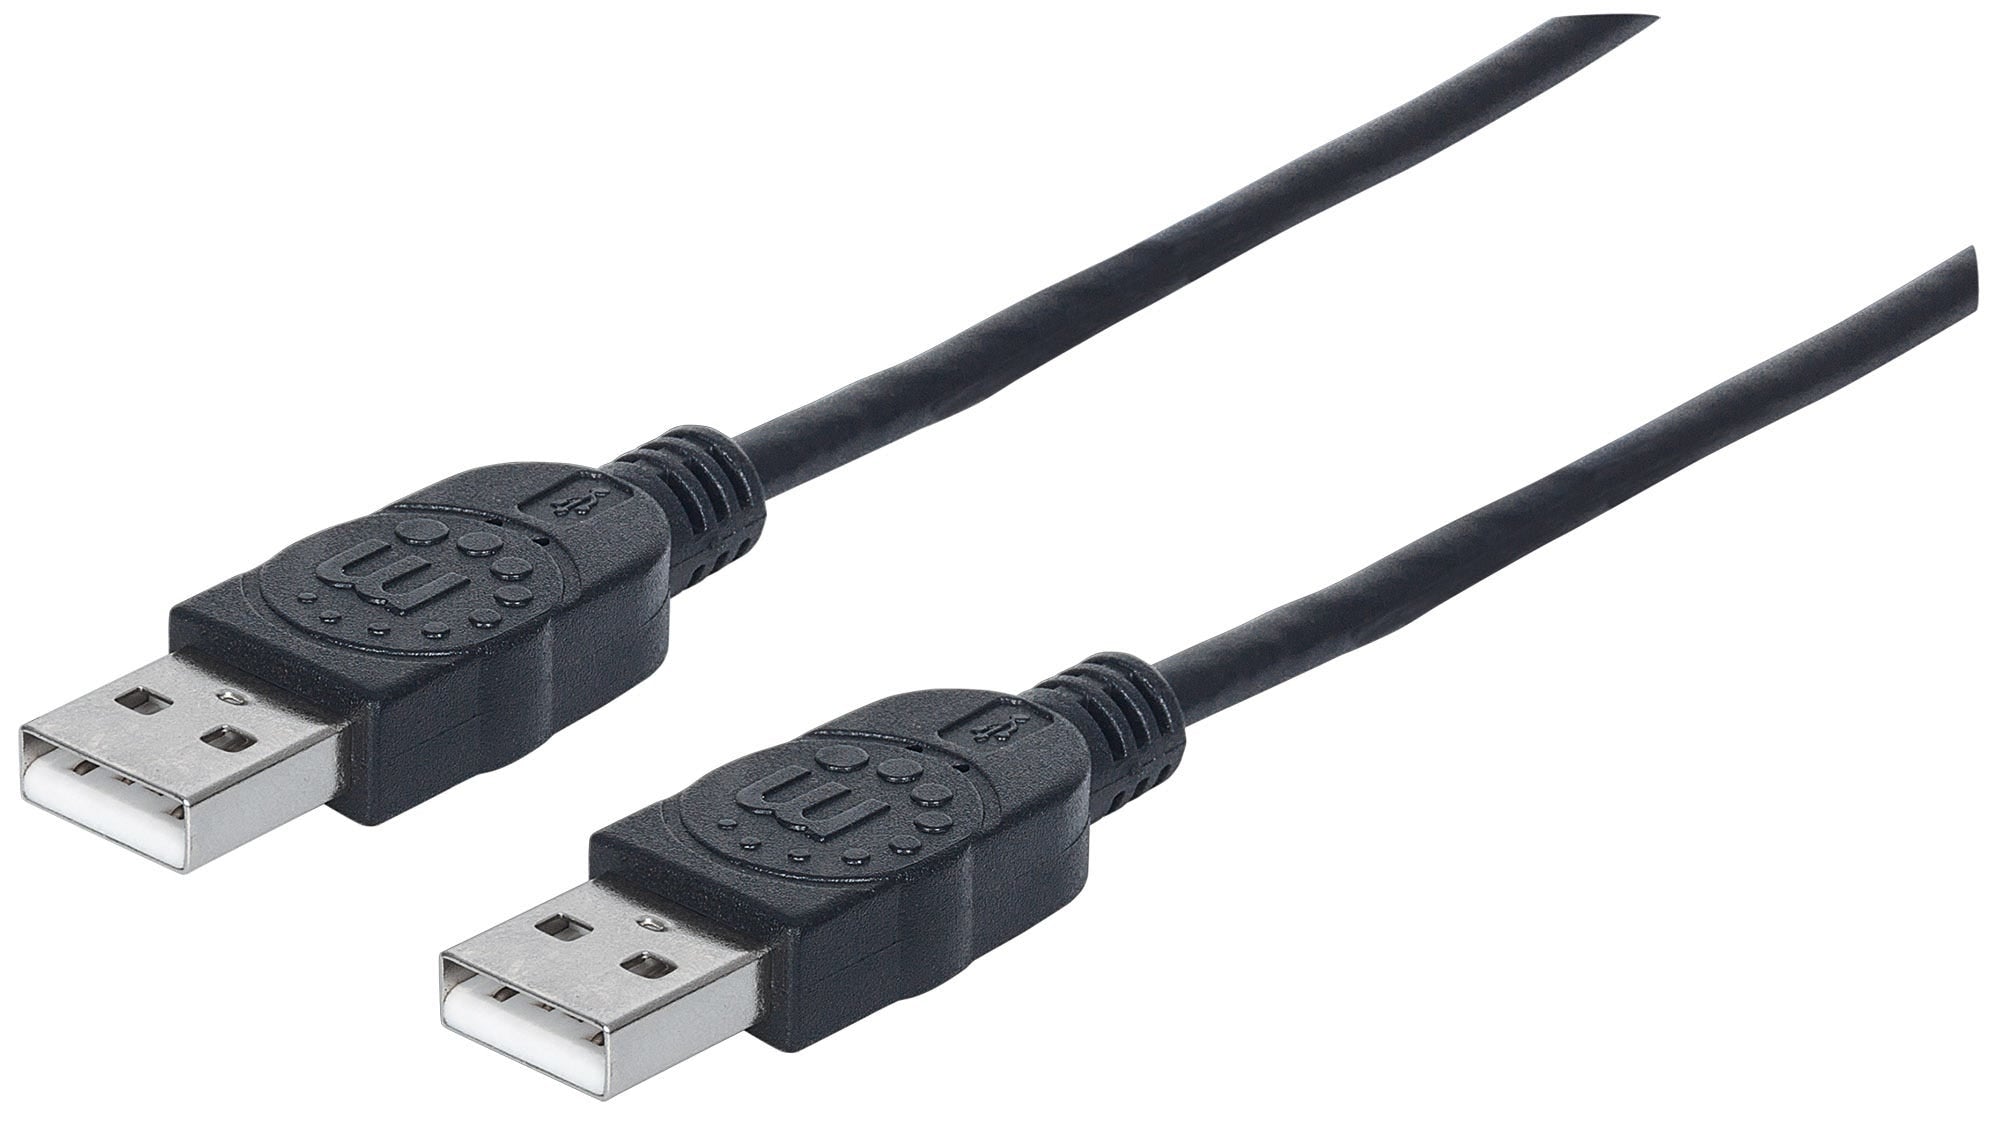 Manhattan USB-A to USB-A Cable, 1m, Male to Male, 480 Mbps (USB 2.0), Equivalent to Startech USB2AA1M, Hi-Speed USB, Black, Lifetime Warranty, Polybag